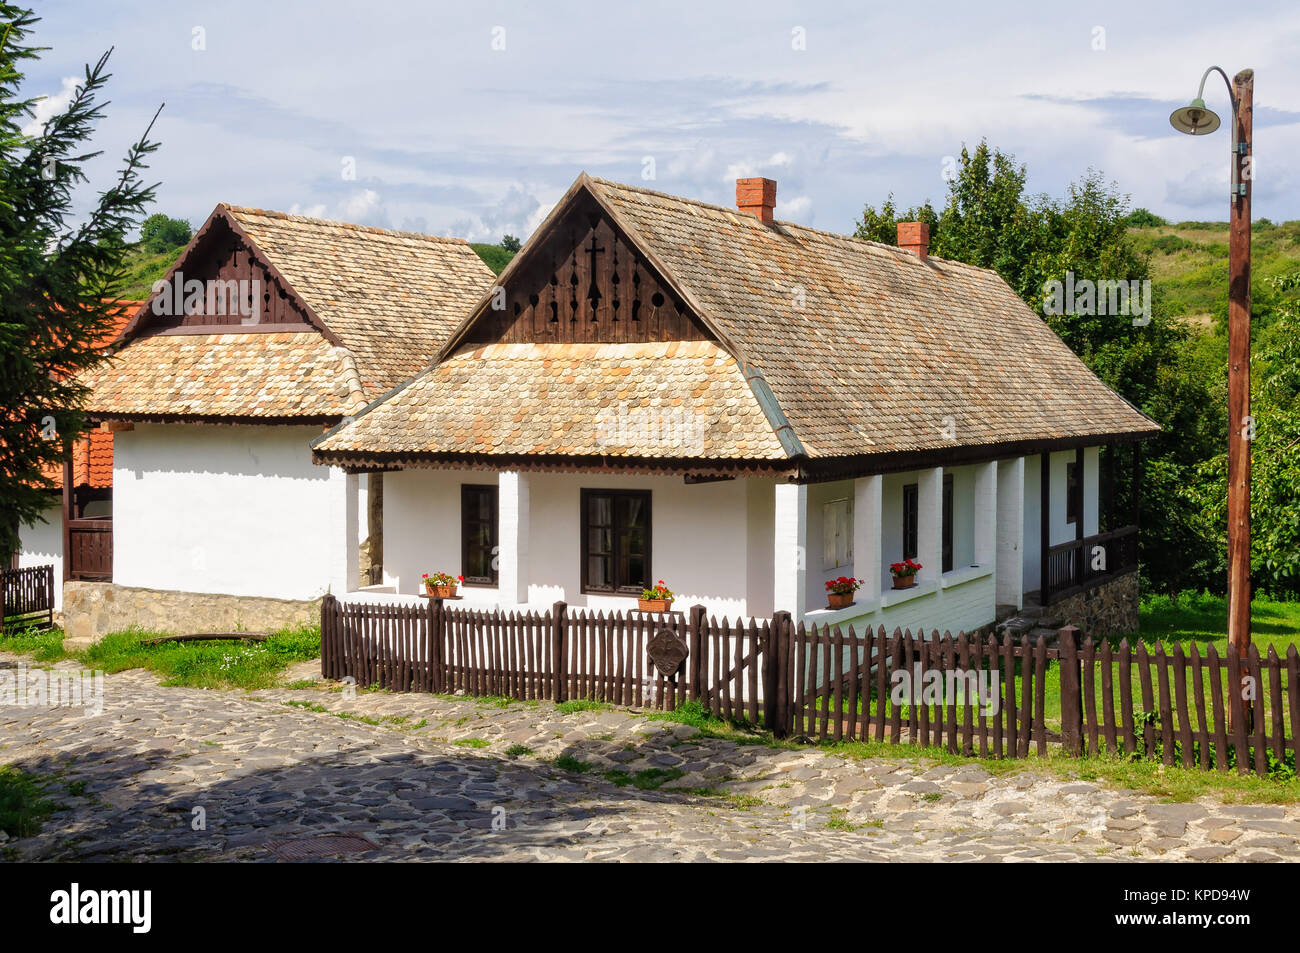 A traditional Paloc farmhouse in the UNESCO World Heritage village - Holloko, Hungary Stock Photo